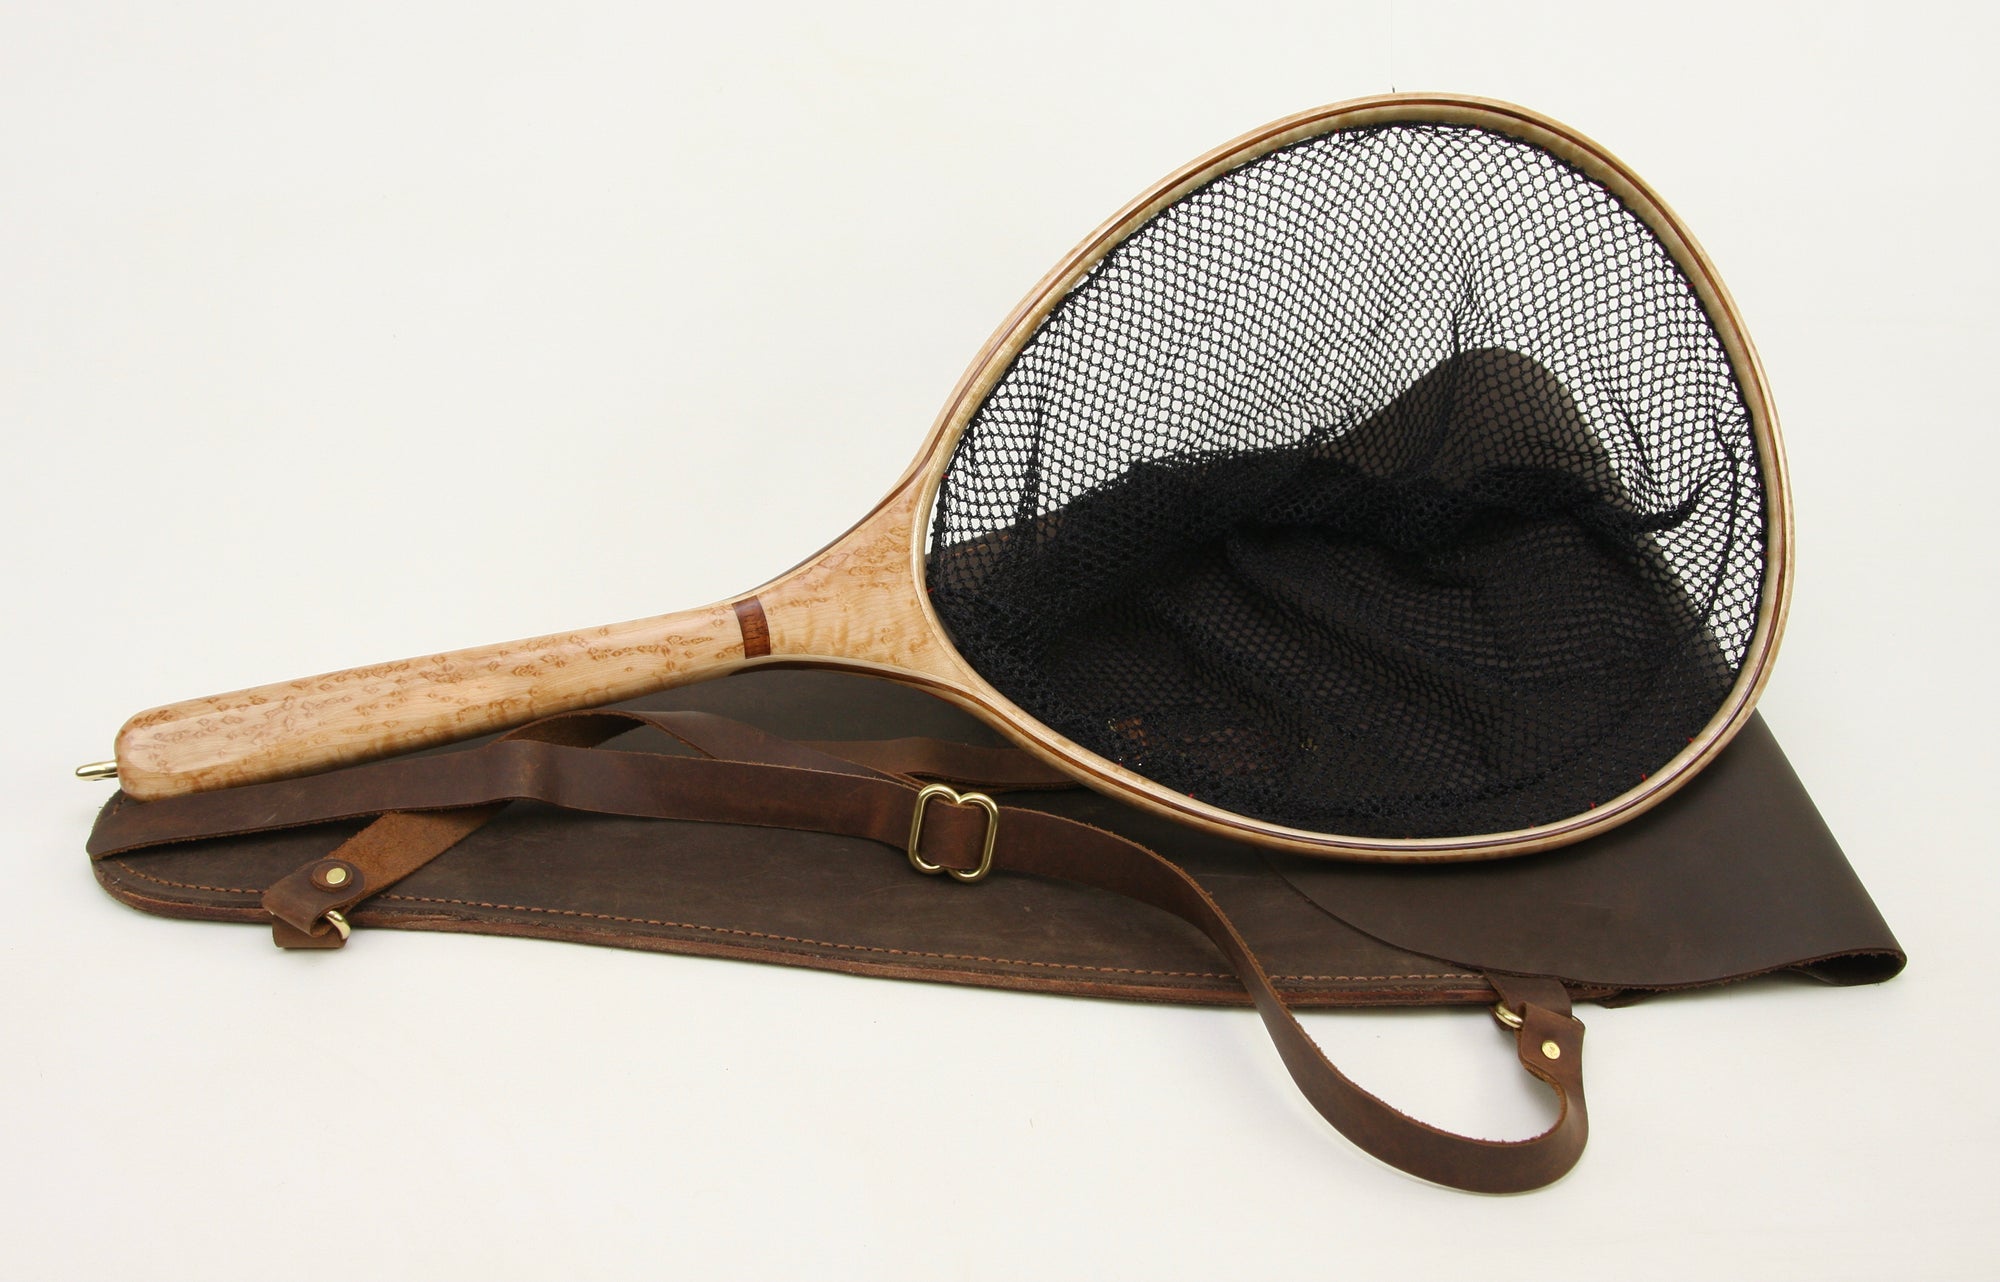 Medium sized Fly Fishing Net with brown trout inlay